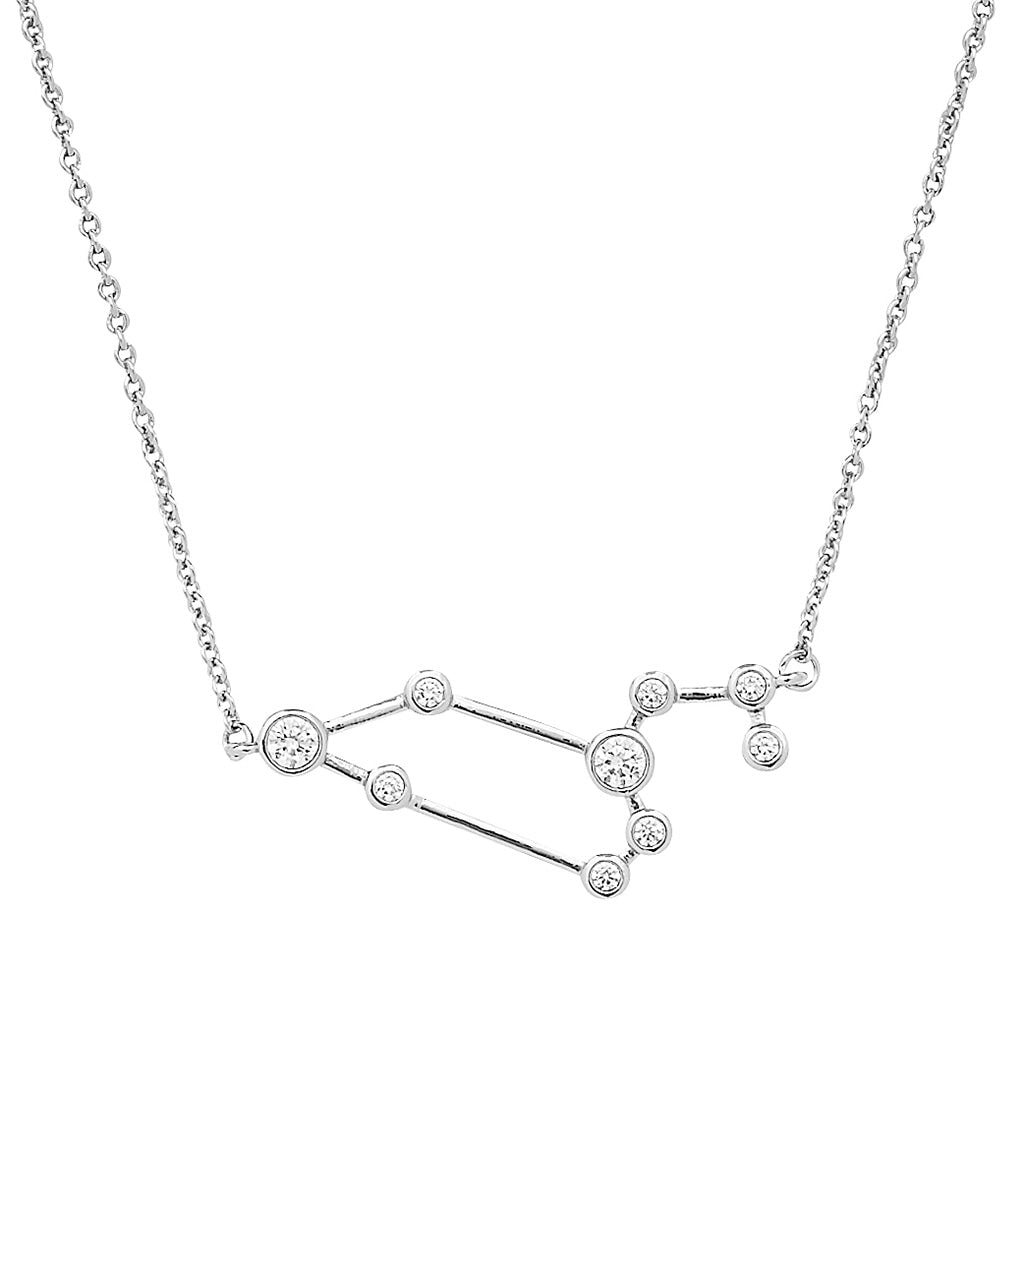 'When Stars Align' Constellation Necklace Necklace Sterling Forever Silver Leo (Jul 23 - Aug 22) 